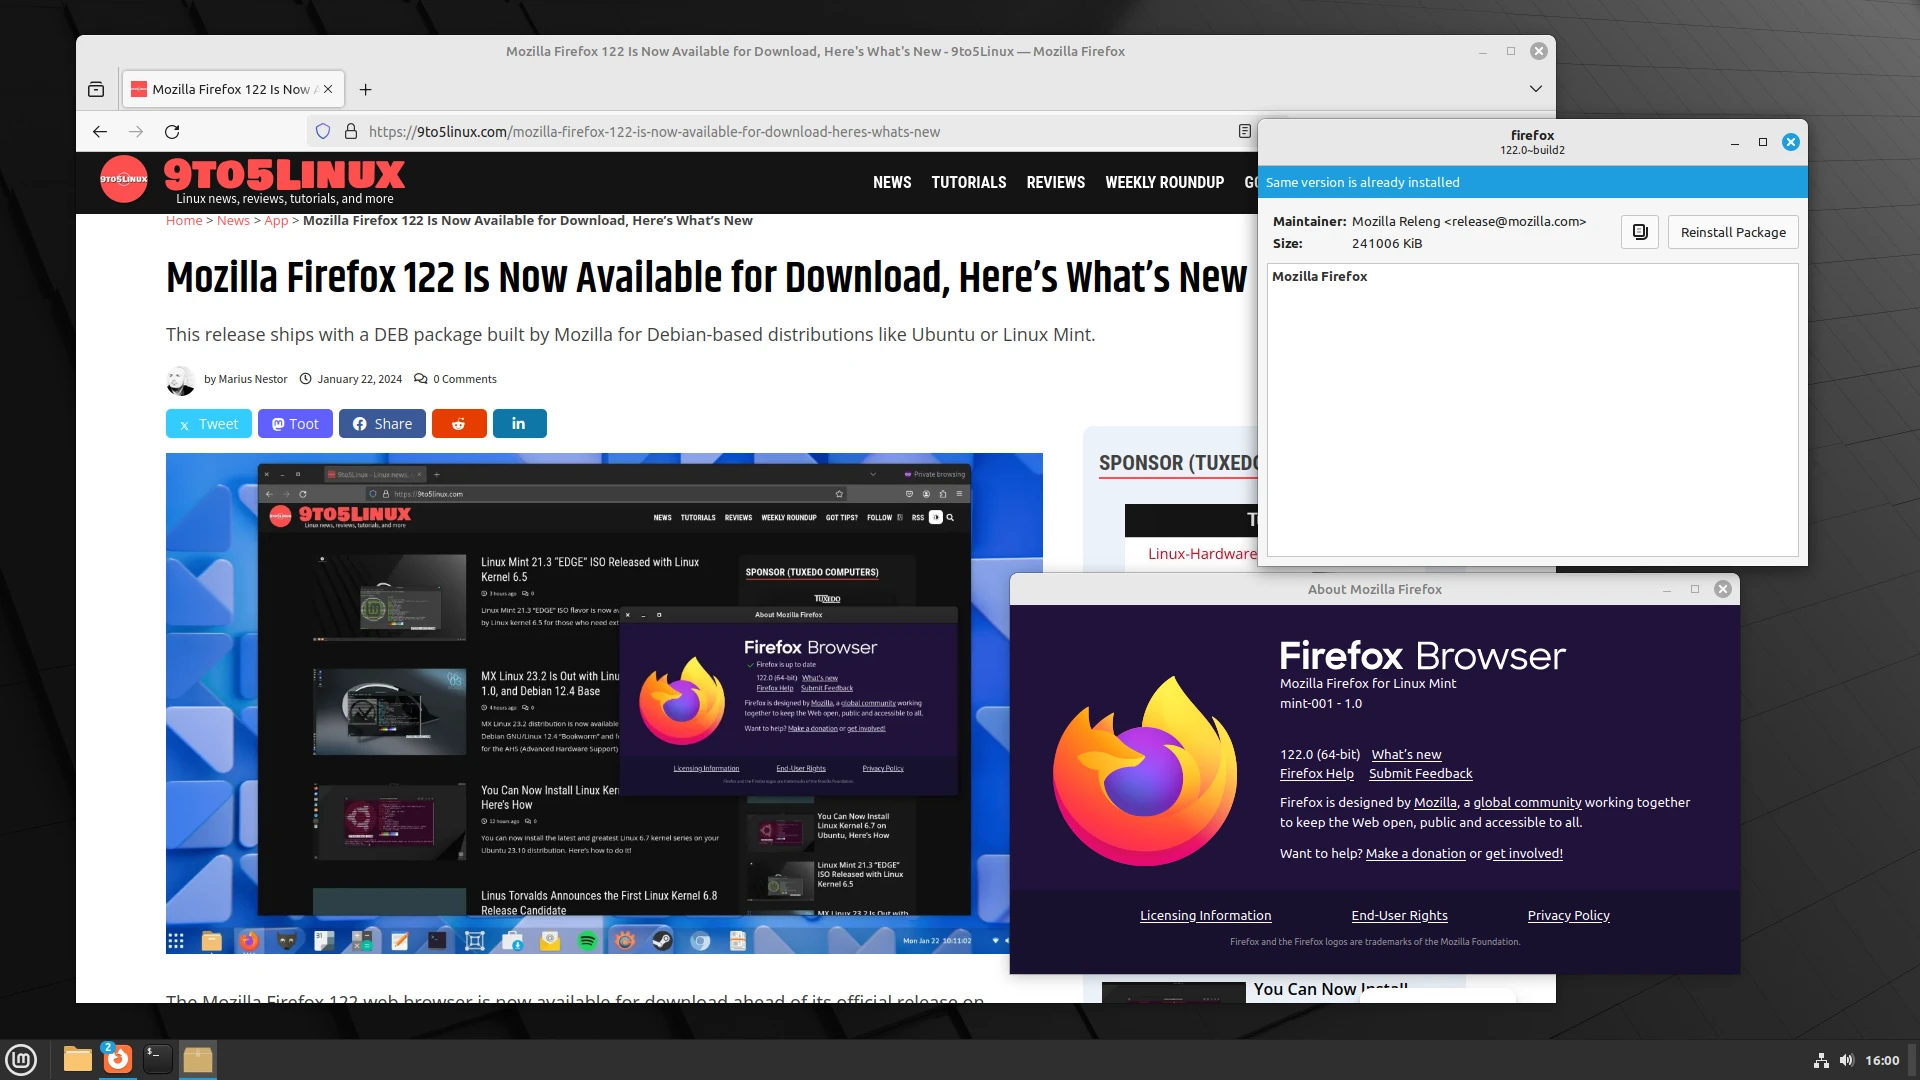 How to Install Firefox as a DEB Package on Debian, Ubuntu, or Linux Mint